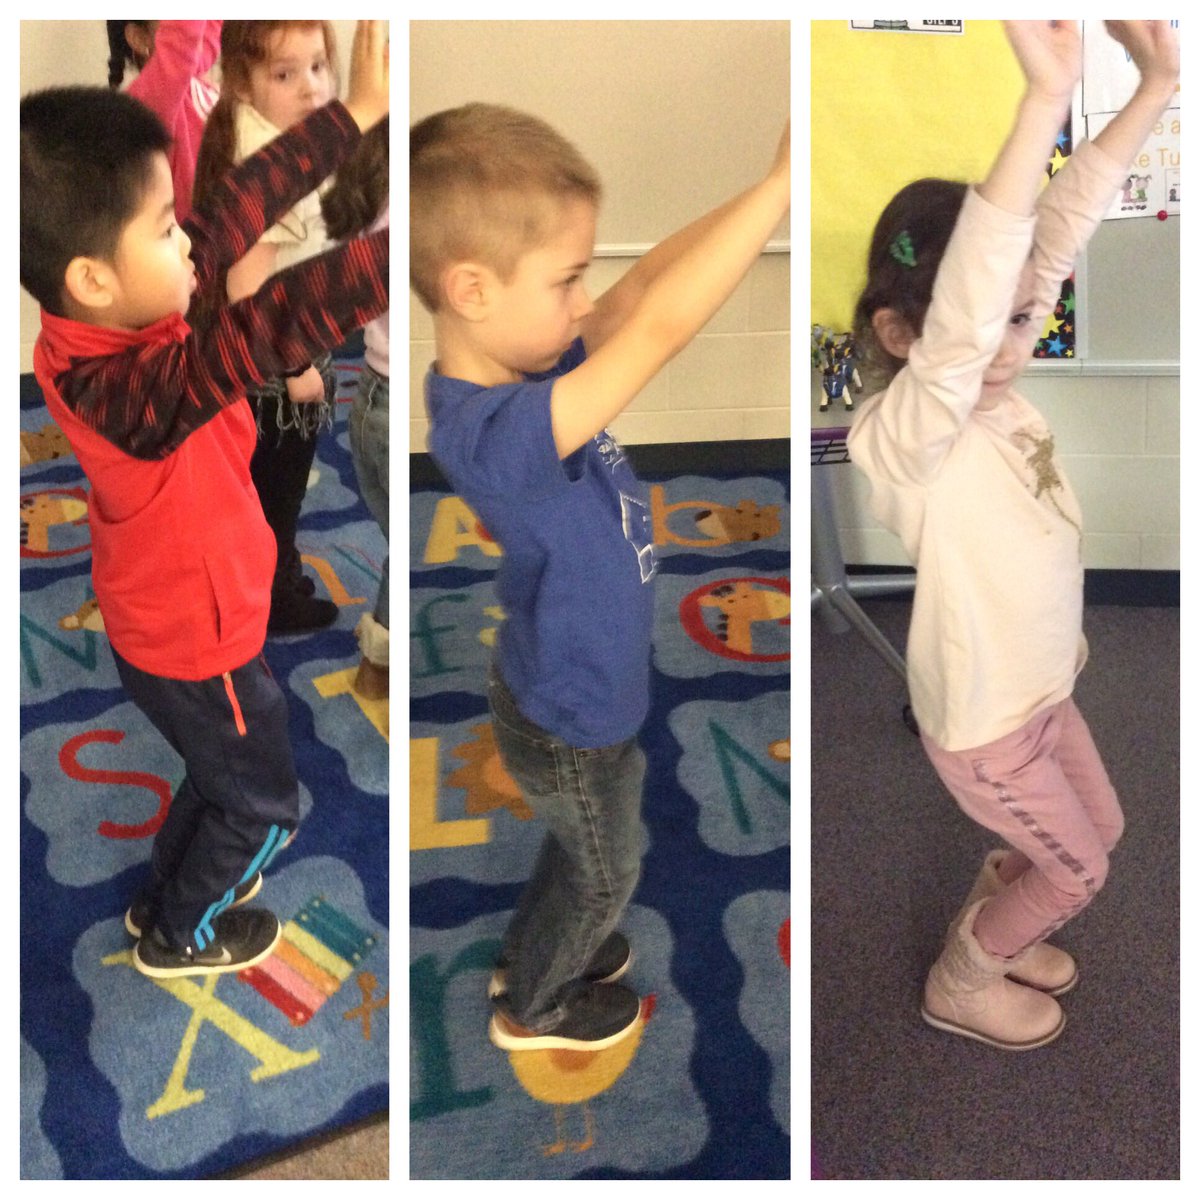 Practicing mindful movements to get our minds and bodies ready to learn. #d60learns #mindfulmovements #yoga #chairpose #focus #kindergarten